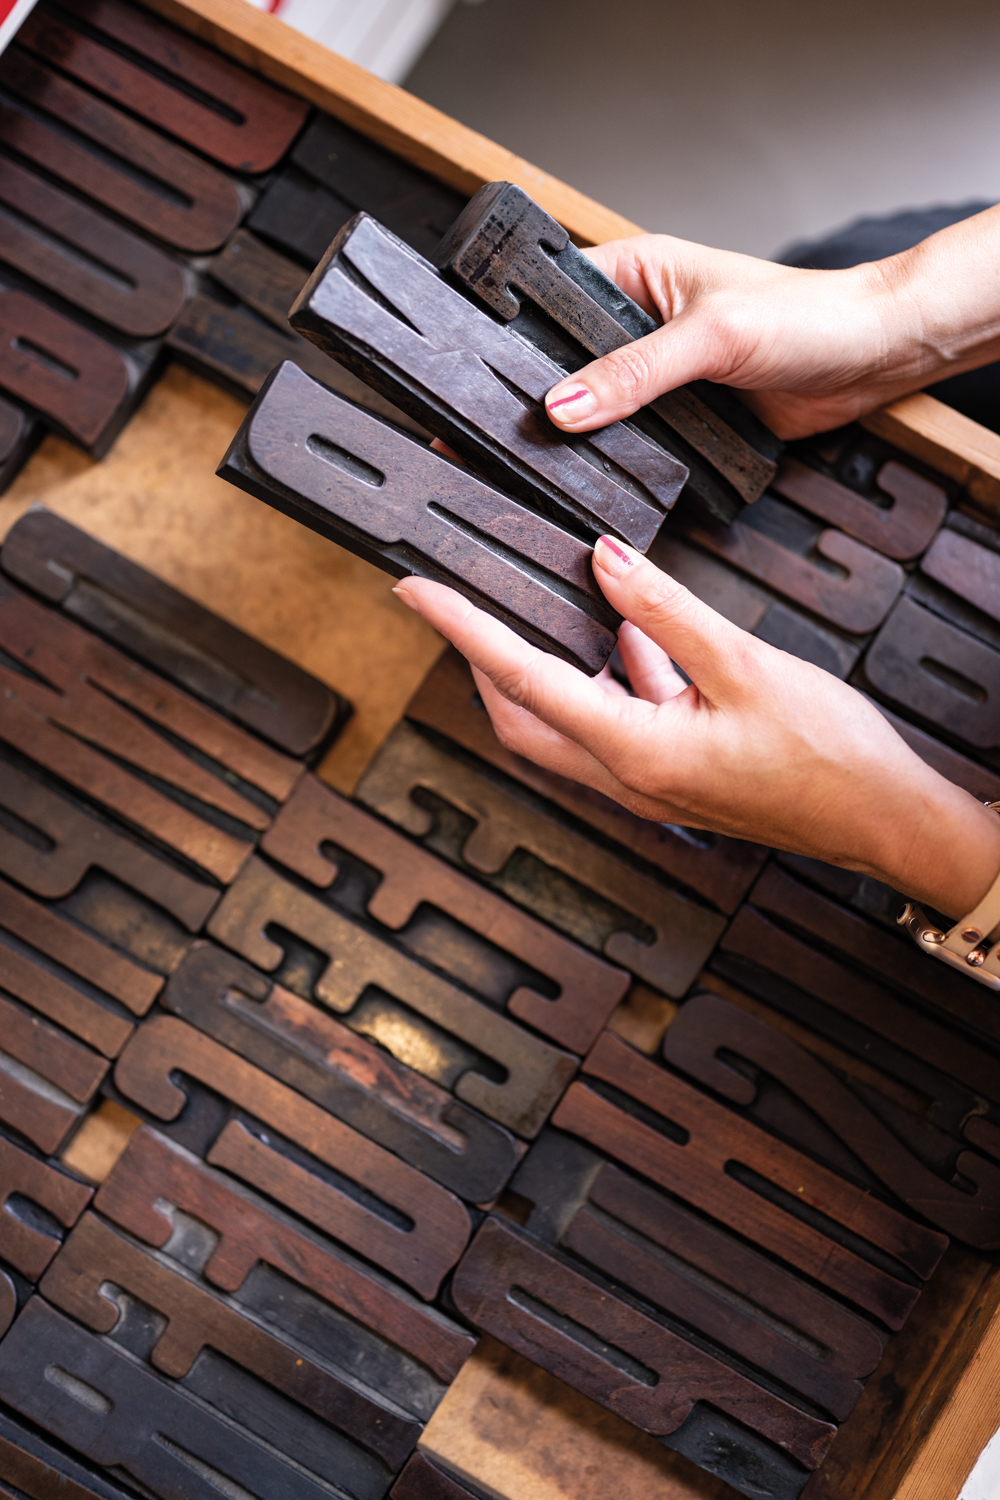 Large wooden printing blocks contain letters.